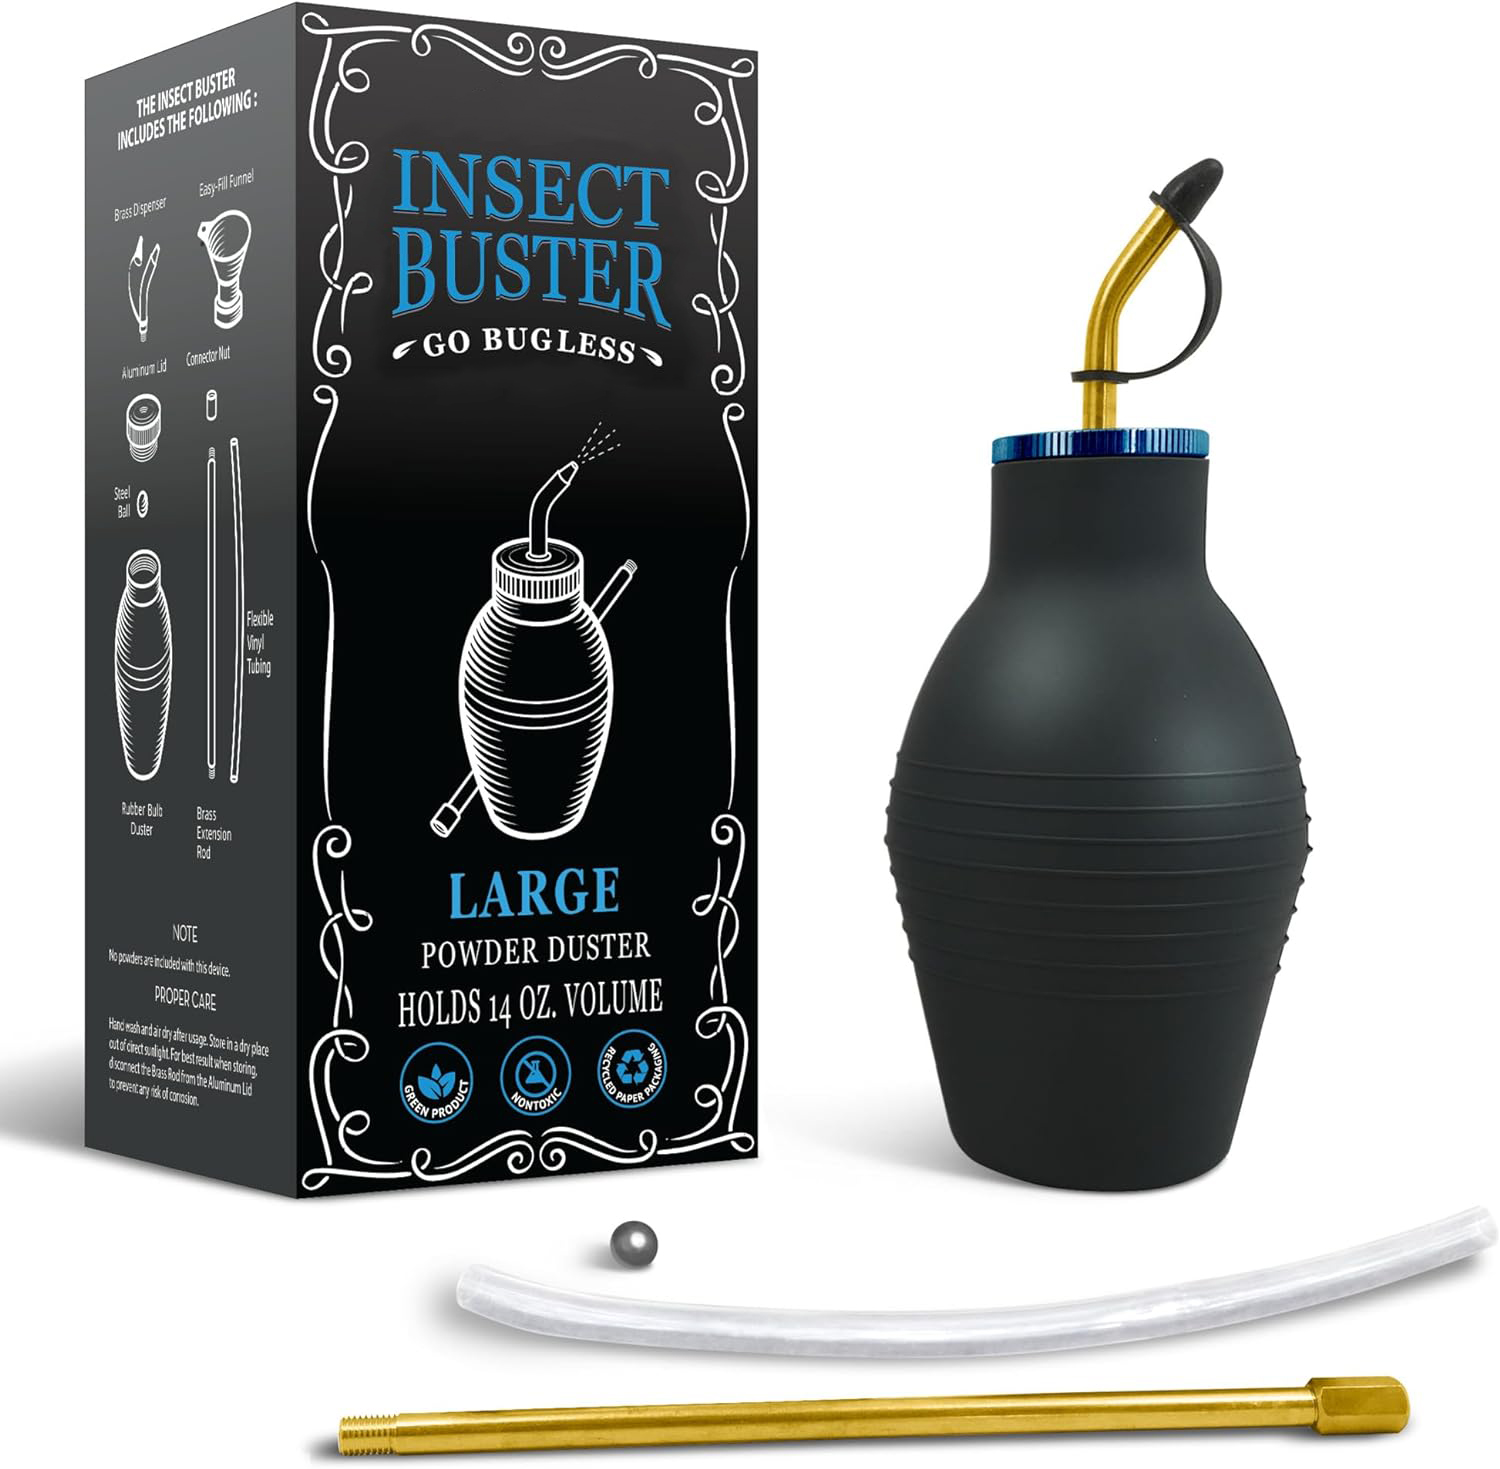 The Insect Buster - Bulb Duster, Sprayer, Applicator, Dispenser for Diatomaceous Earth and Other Powders - Effective Dust Application Tool